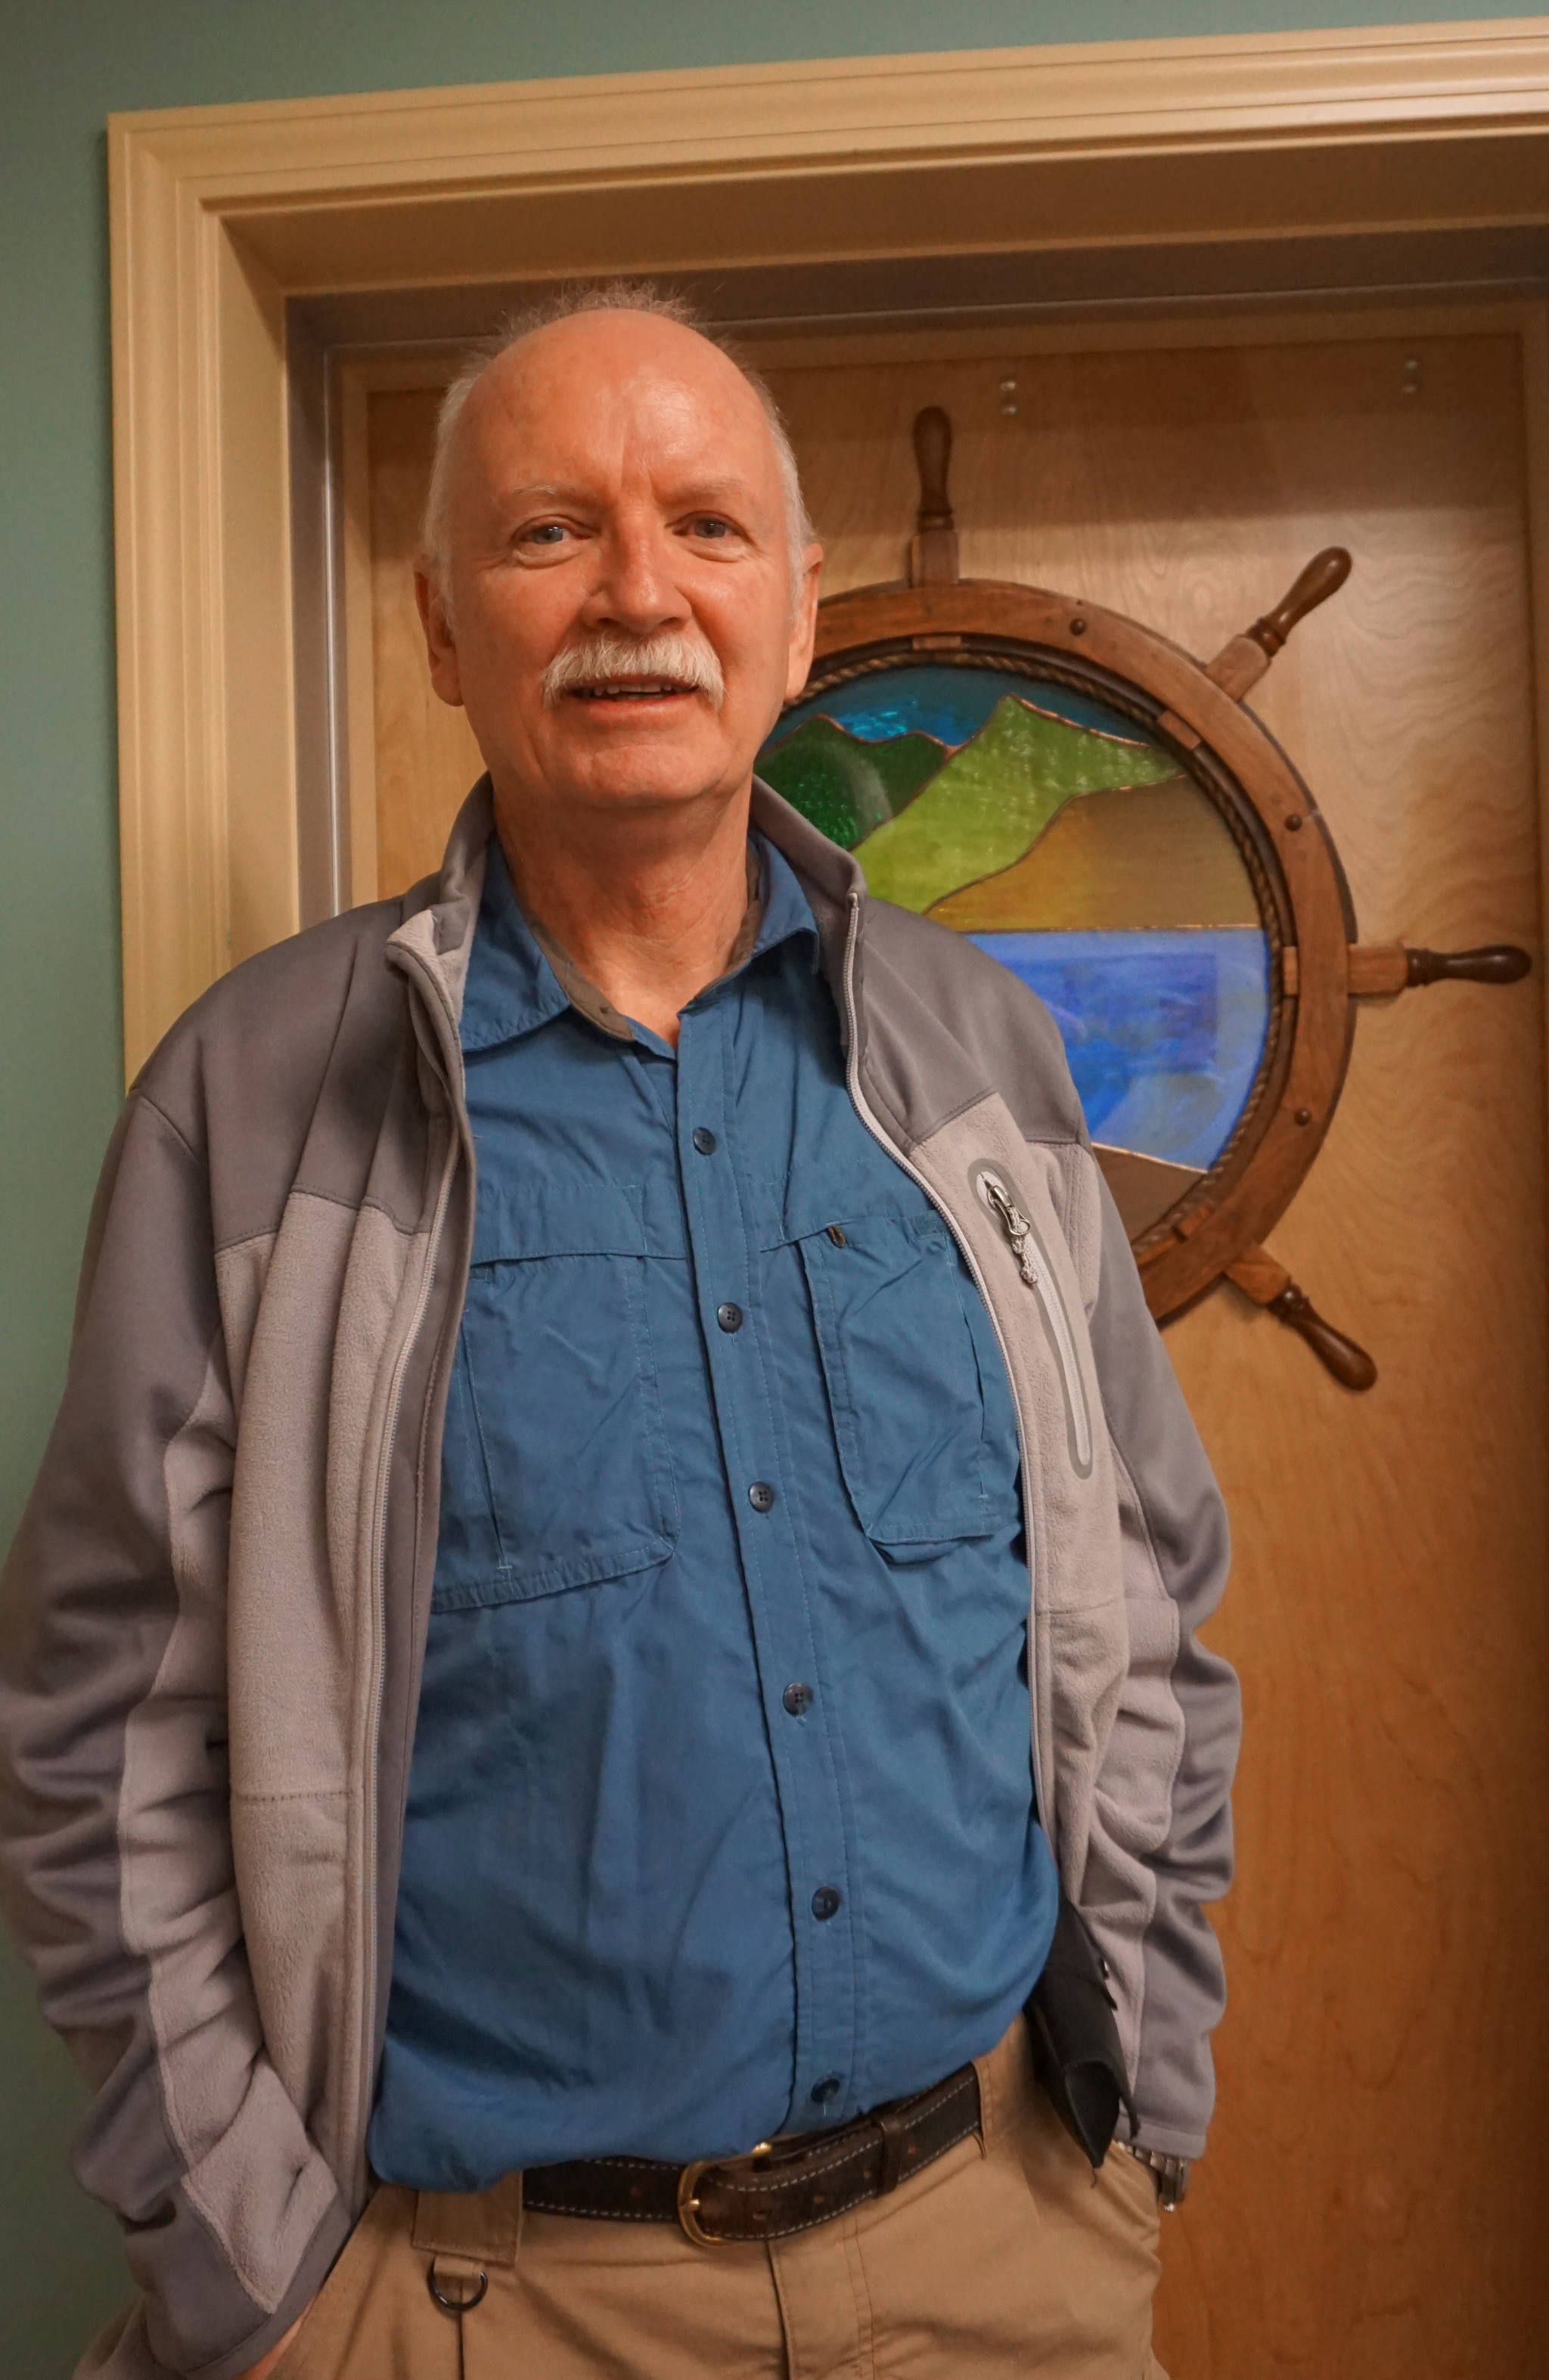 Interim Homer Volunteer Fire Department Chief Robert Purcell poses for a photo at Homer City Hall on Dec. 18, 2018, in Homer, Alaska. Purcell was a former HVFD chief from 1992-99. (Photo provided)